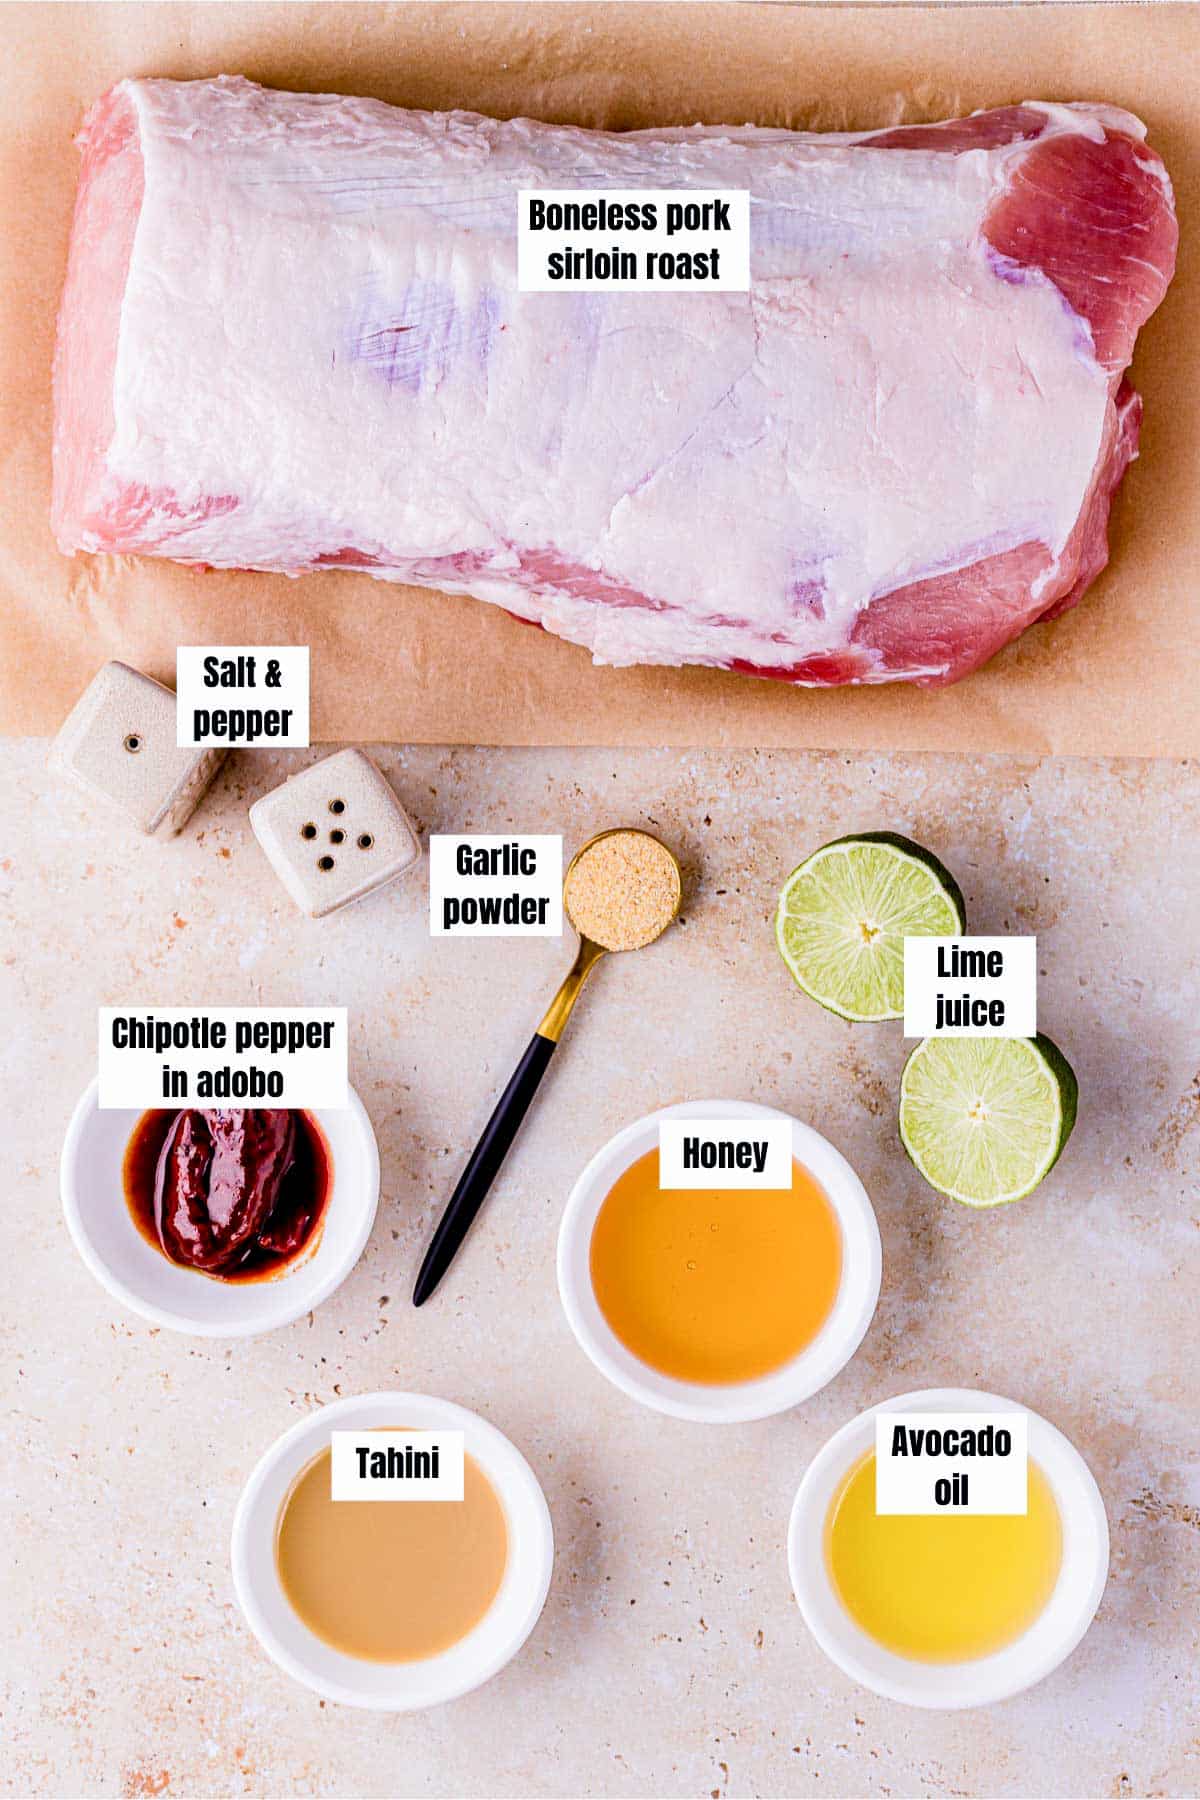 ingredients for sous vide pork sirloin roast on a surface with text labels.